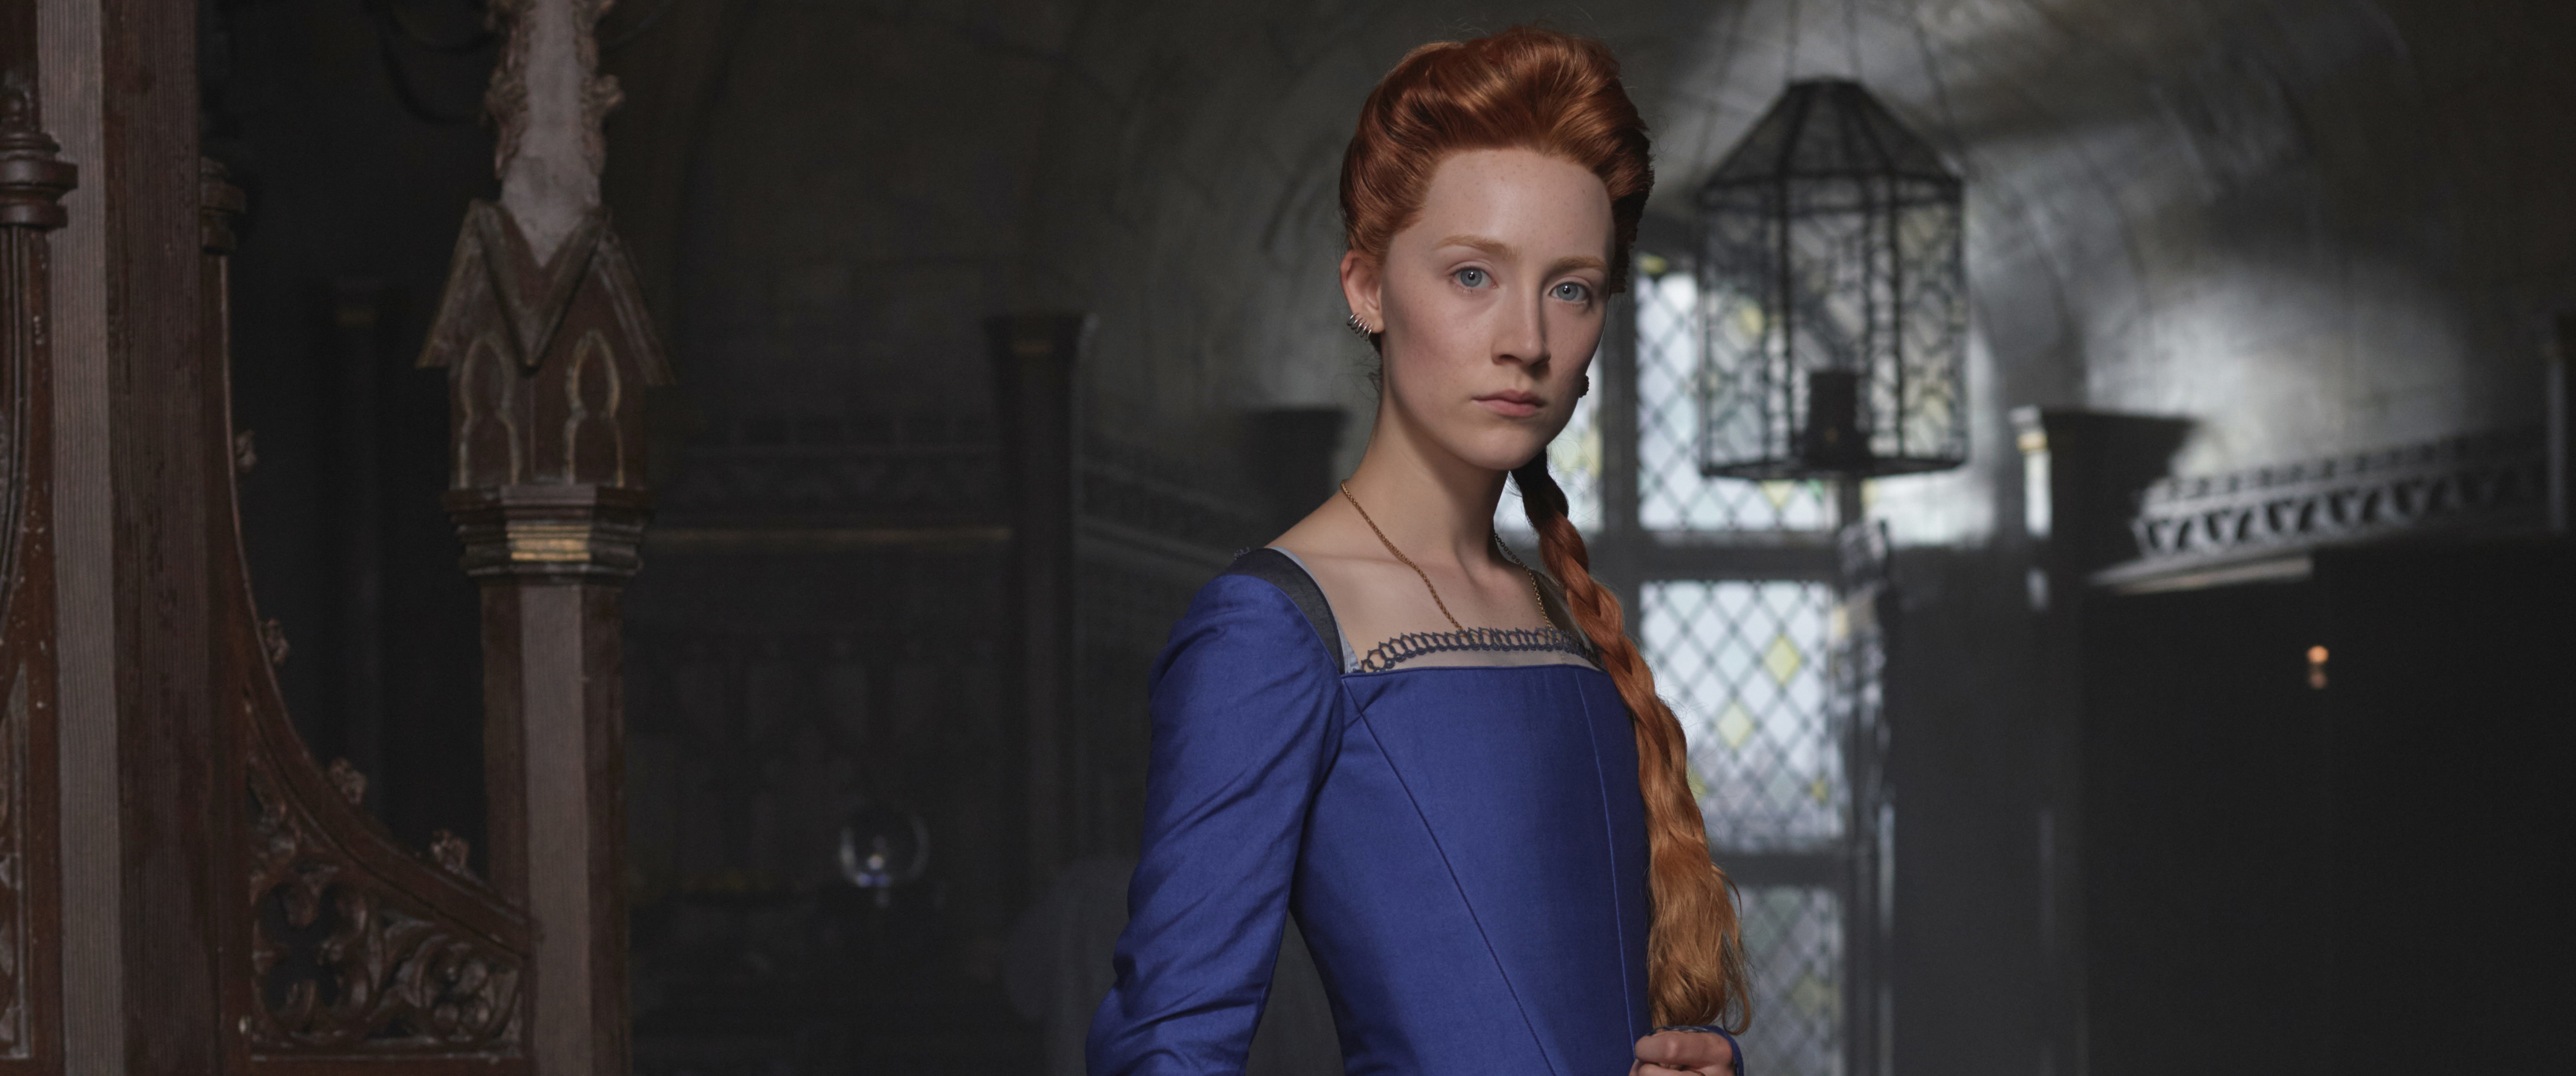 3449x1440 Resolution Saoirse Ronan as Mary in Mary Queen of Scots ...